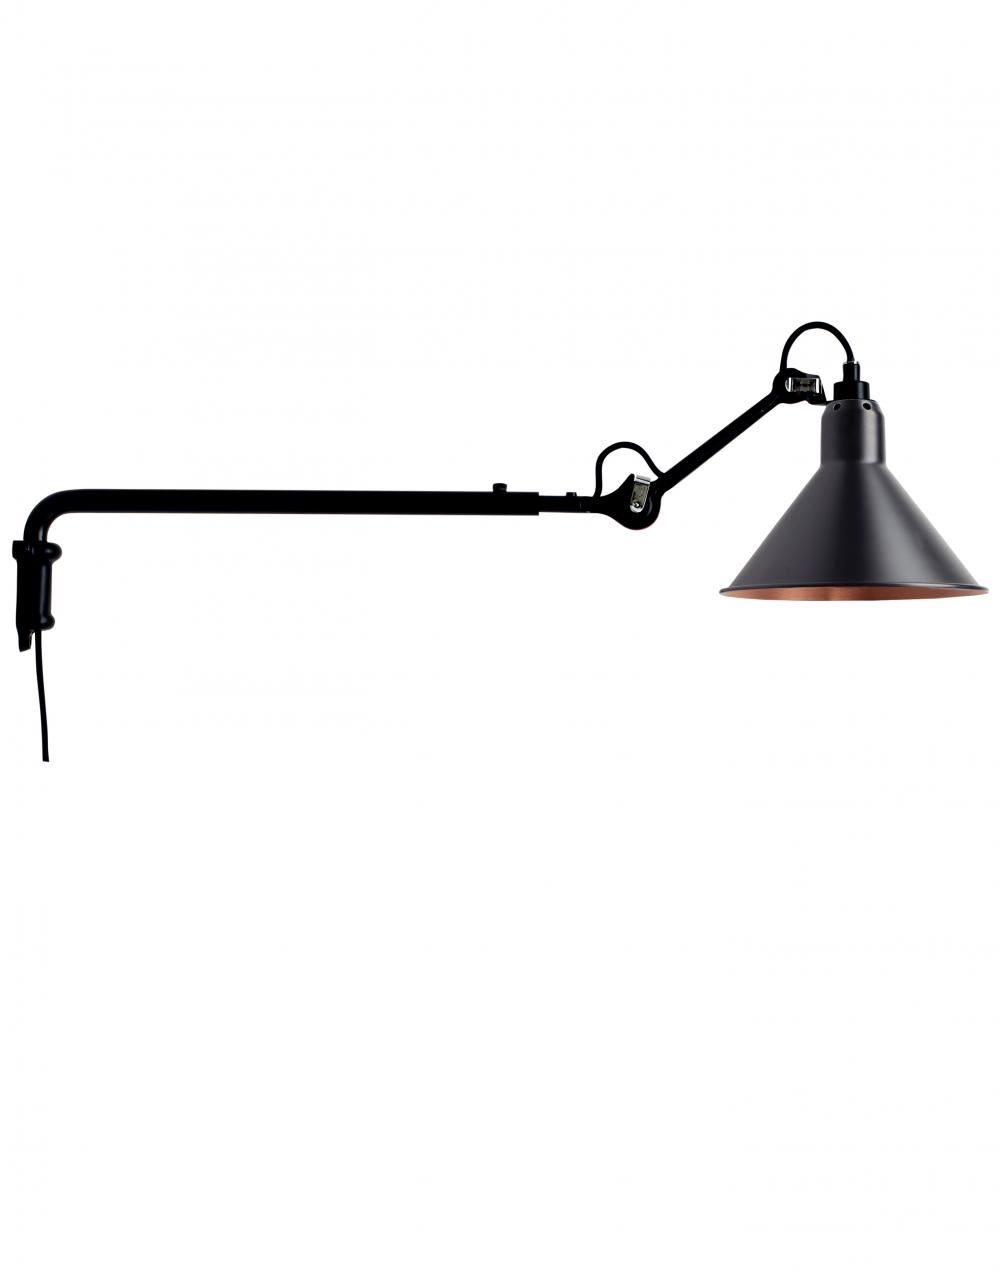 Lampe Gras 203 Wall Lamp Black Shade With Copper Interior Conic